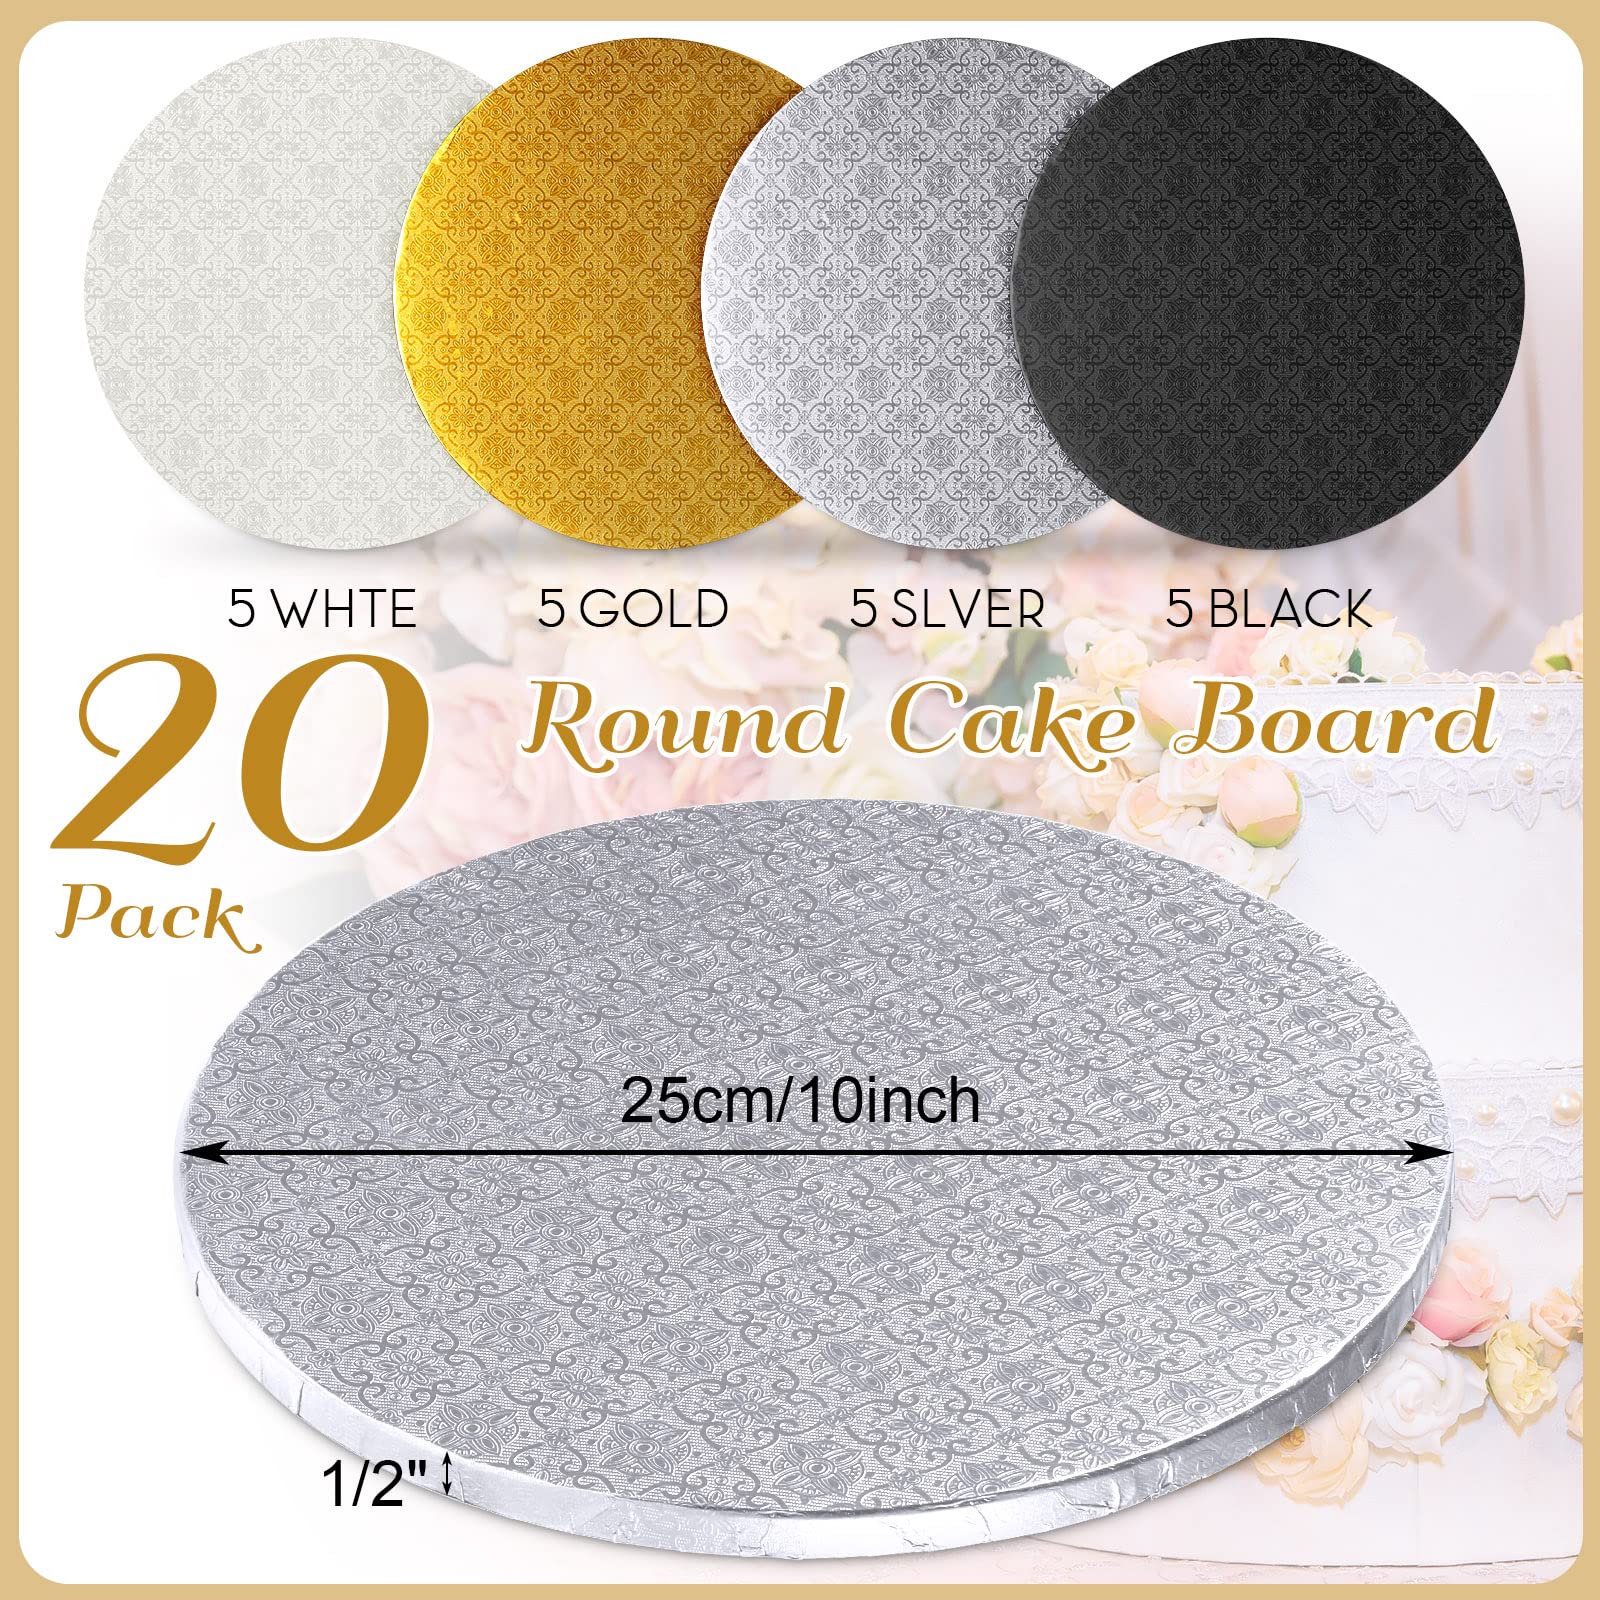 20 Pieces Cake Boards 10 Inch Round Cake Drum with 1/2 Inch Thick Round Cake Stands Cake Smooth Edge for Multi Tiered Birthday Wedding Party, Black, Silver, Gold and White